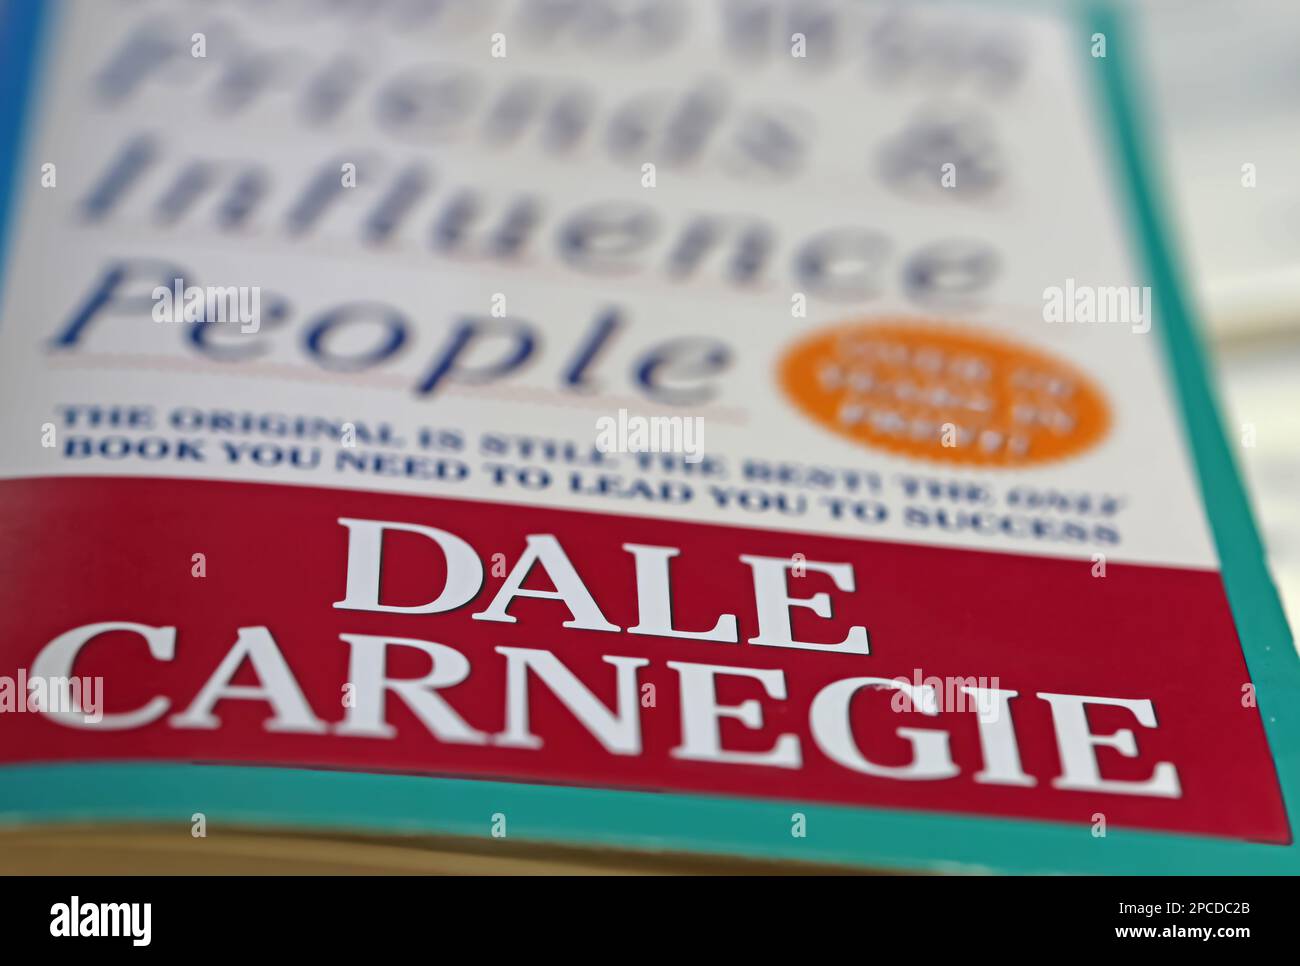 Viersen, Germany - March 9. 2023: Closeup of book cover How to win friends and influence people by Dale Carnegie 1936 Stock Photo